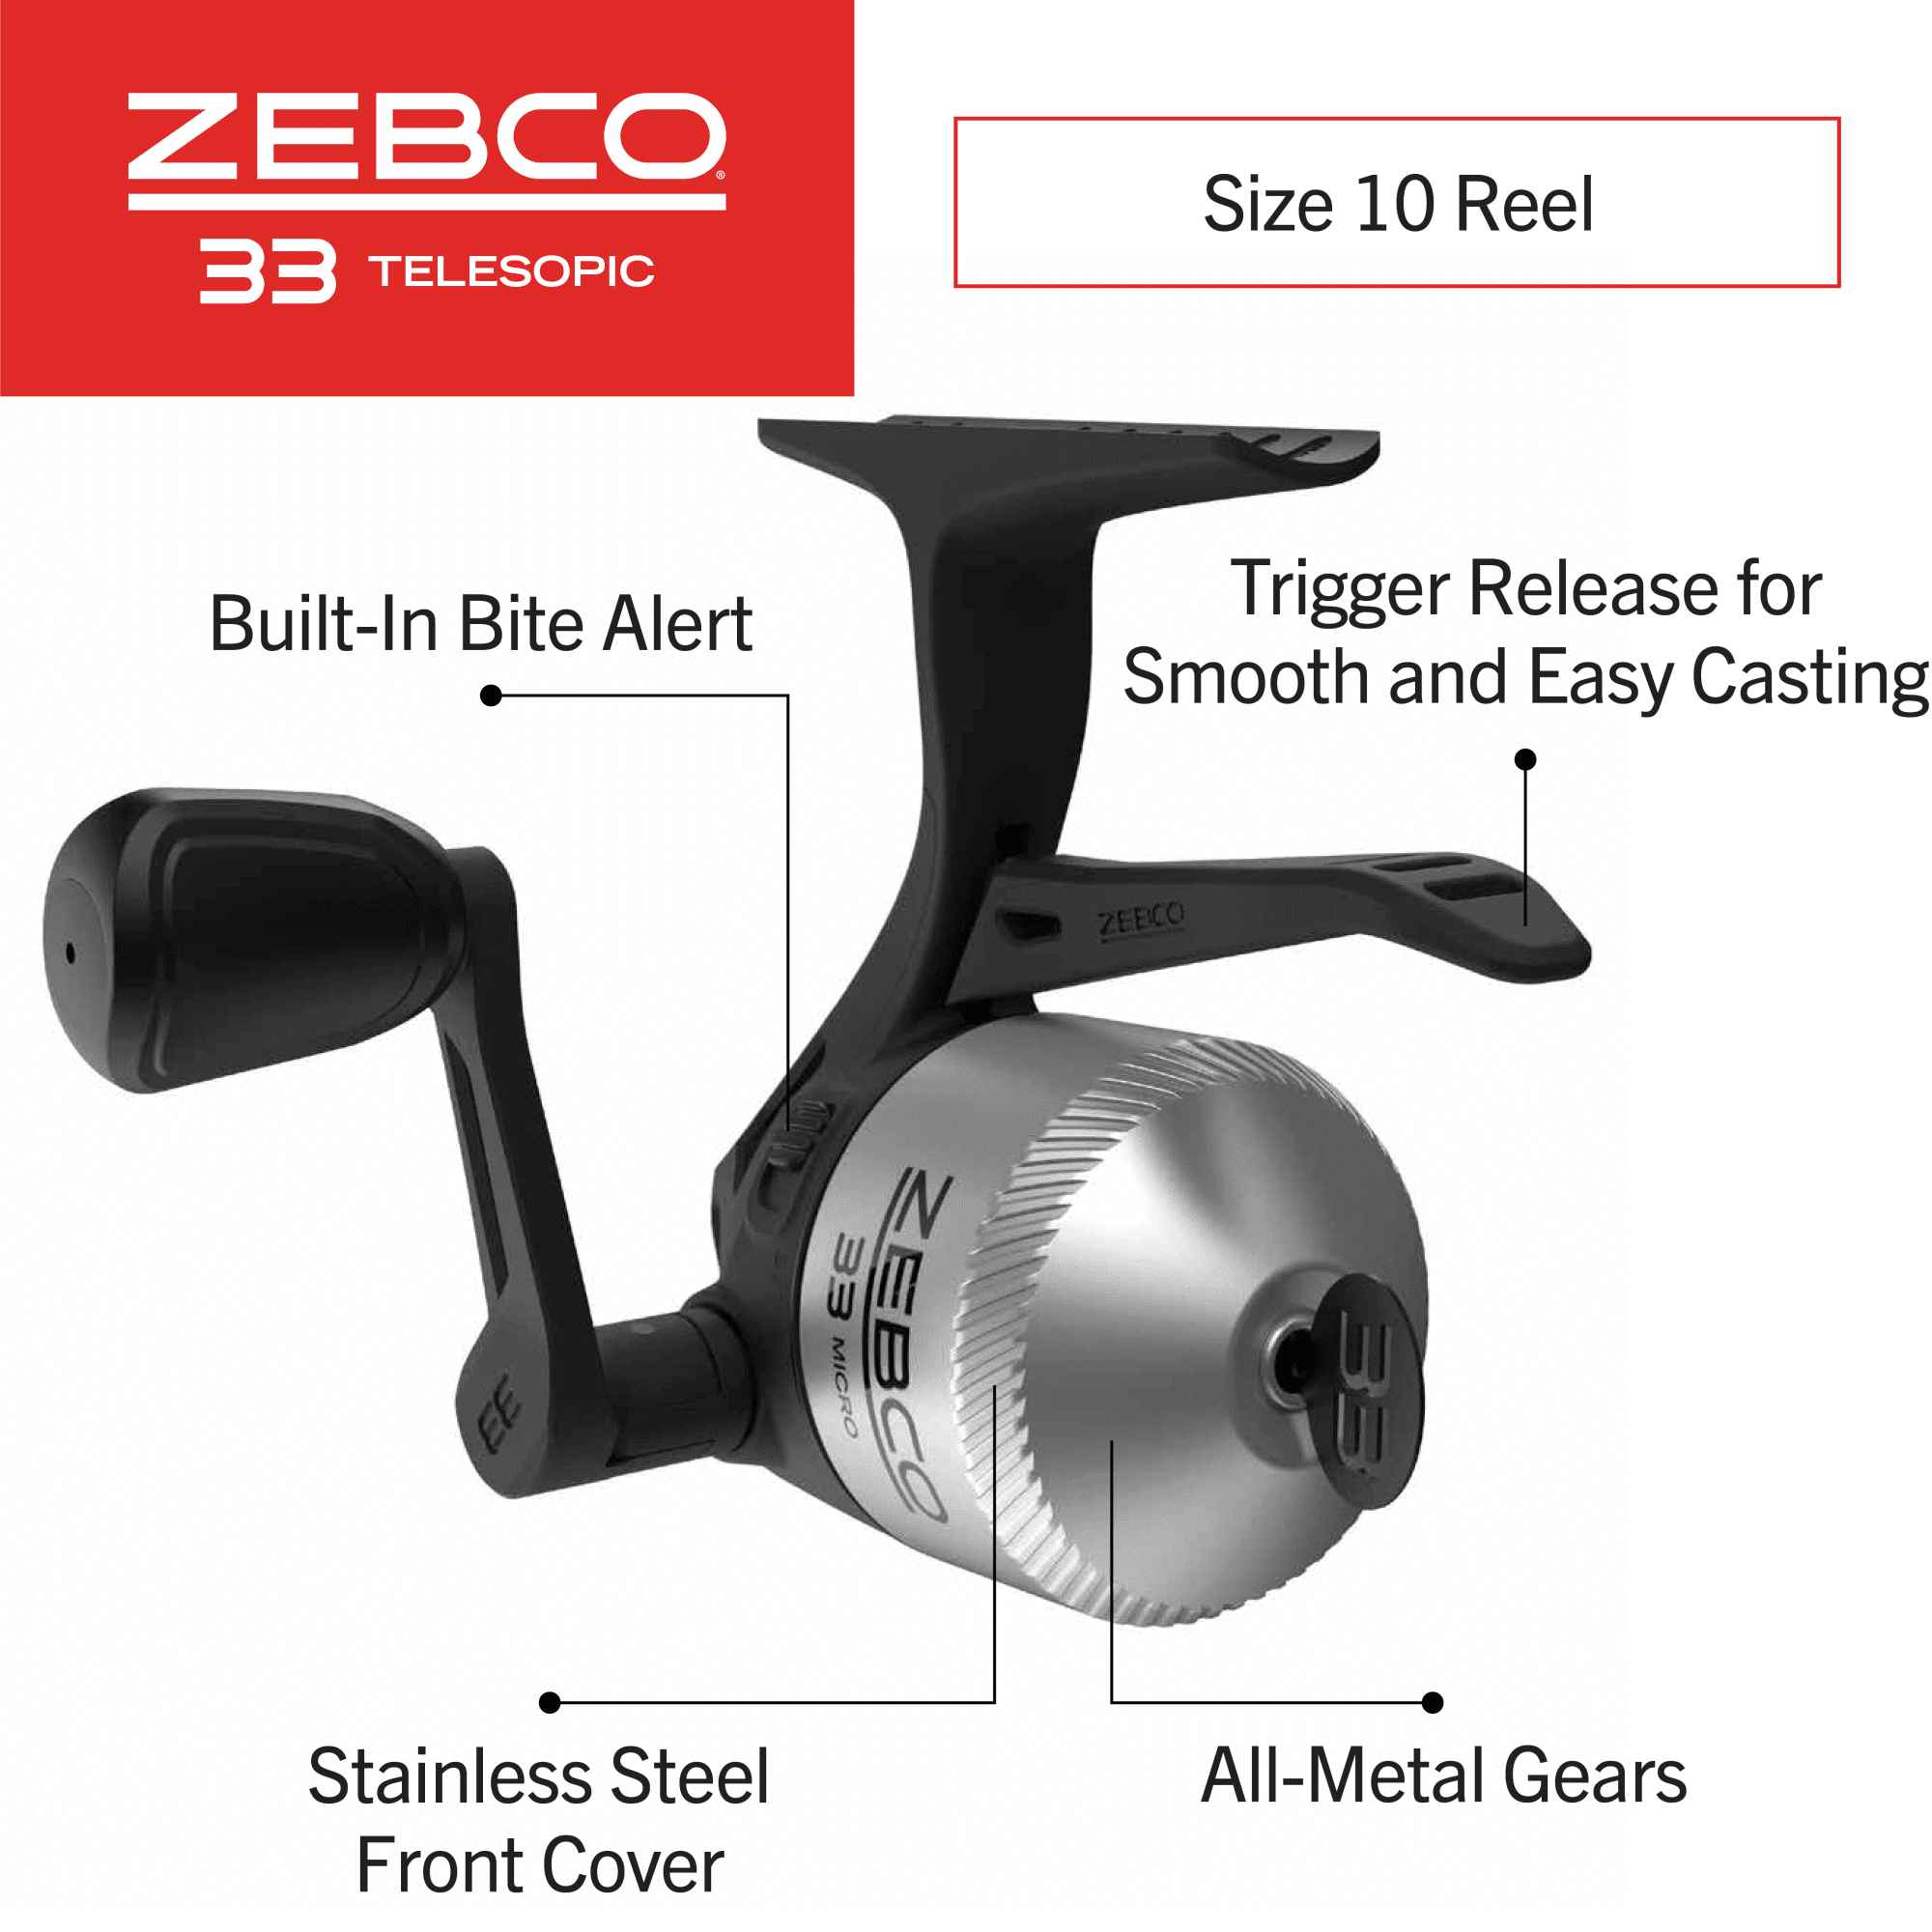 Zebco 33 Spincast Reel and Telescopic Fishing Rod Combo, Extendable  22.5-Inch to 6-Foot E-Glass Fishing Pole, Size 30 Reel, QuickSet  Anti-Reverse Fishing Reel with Bite Alert, Silver/Black 